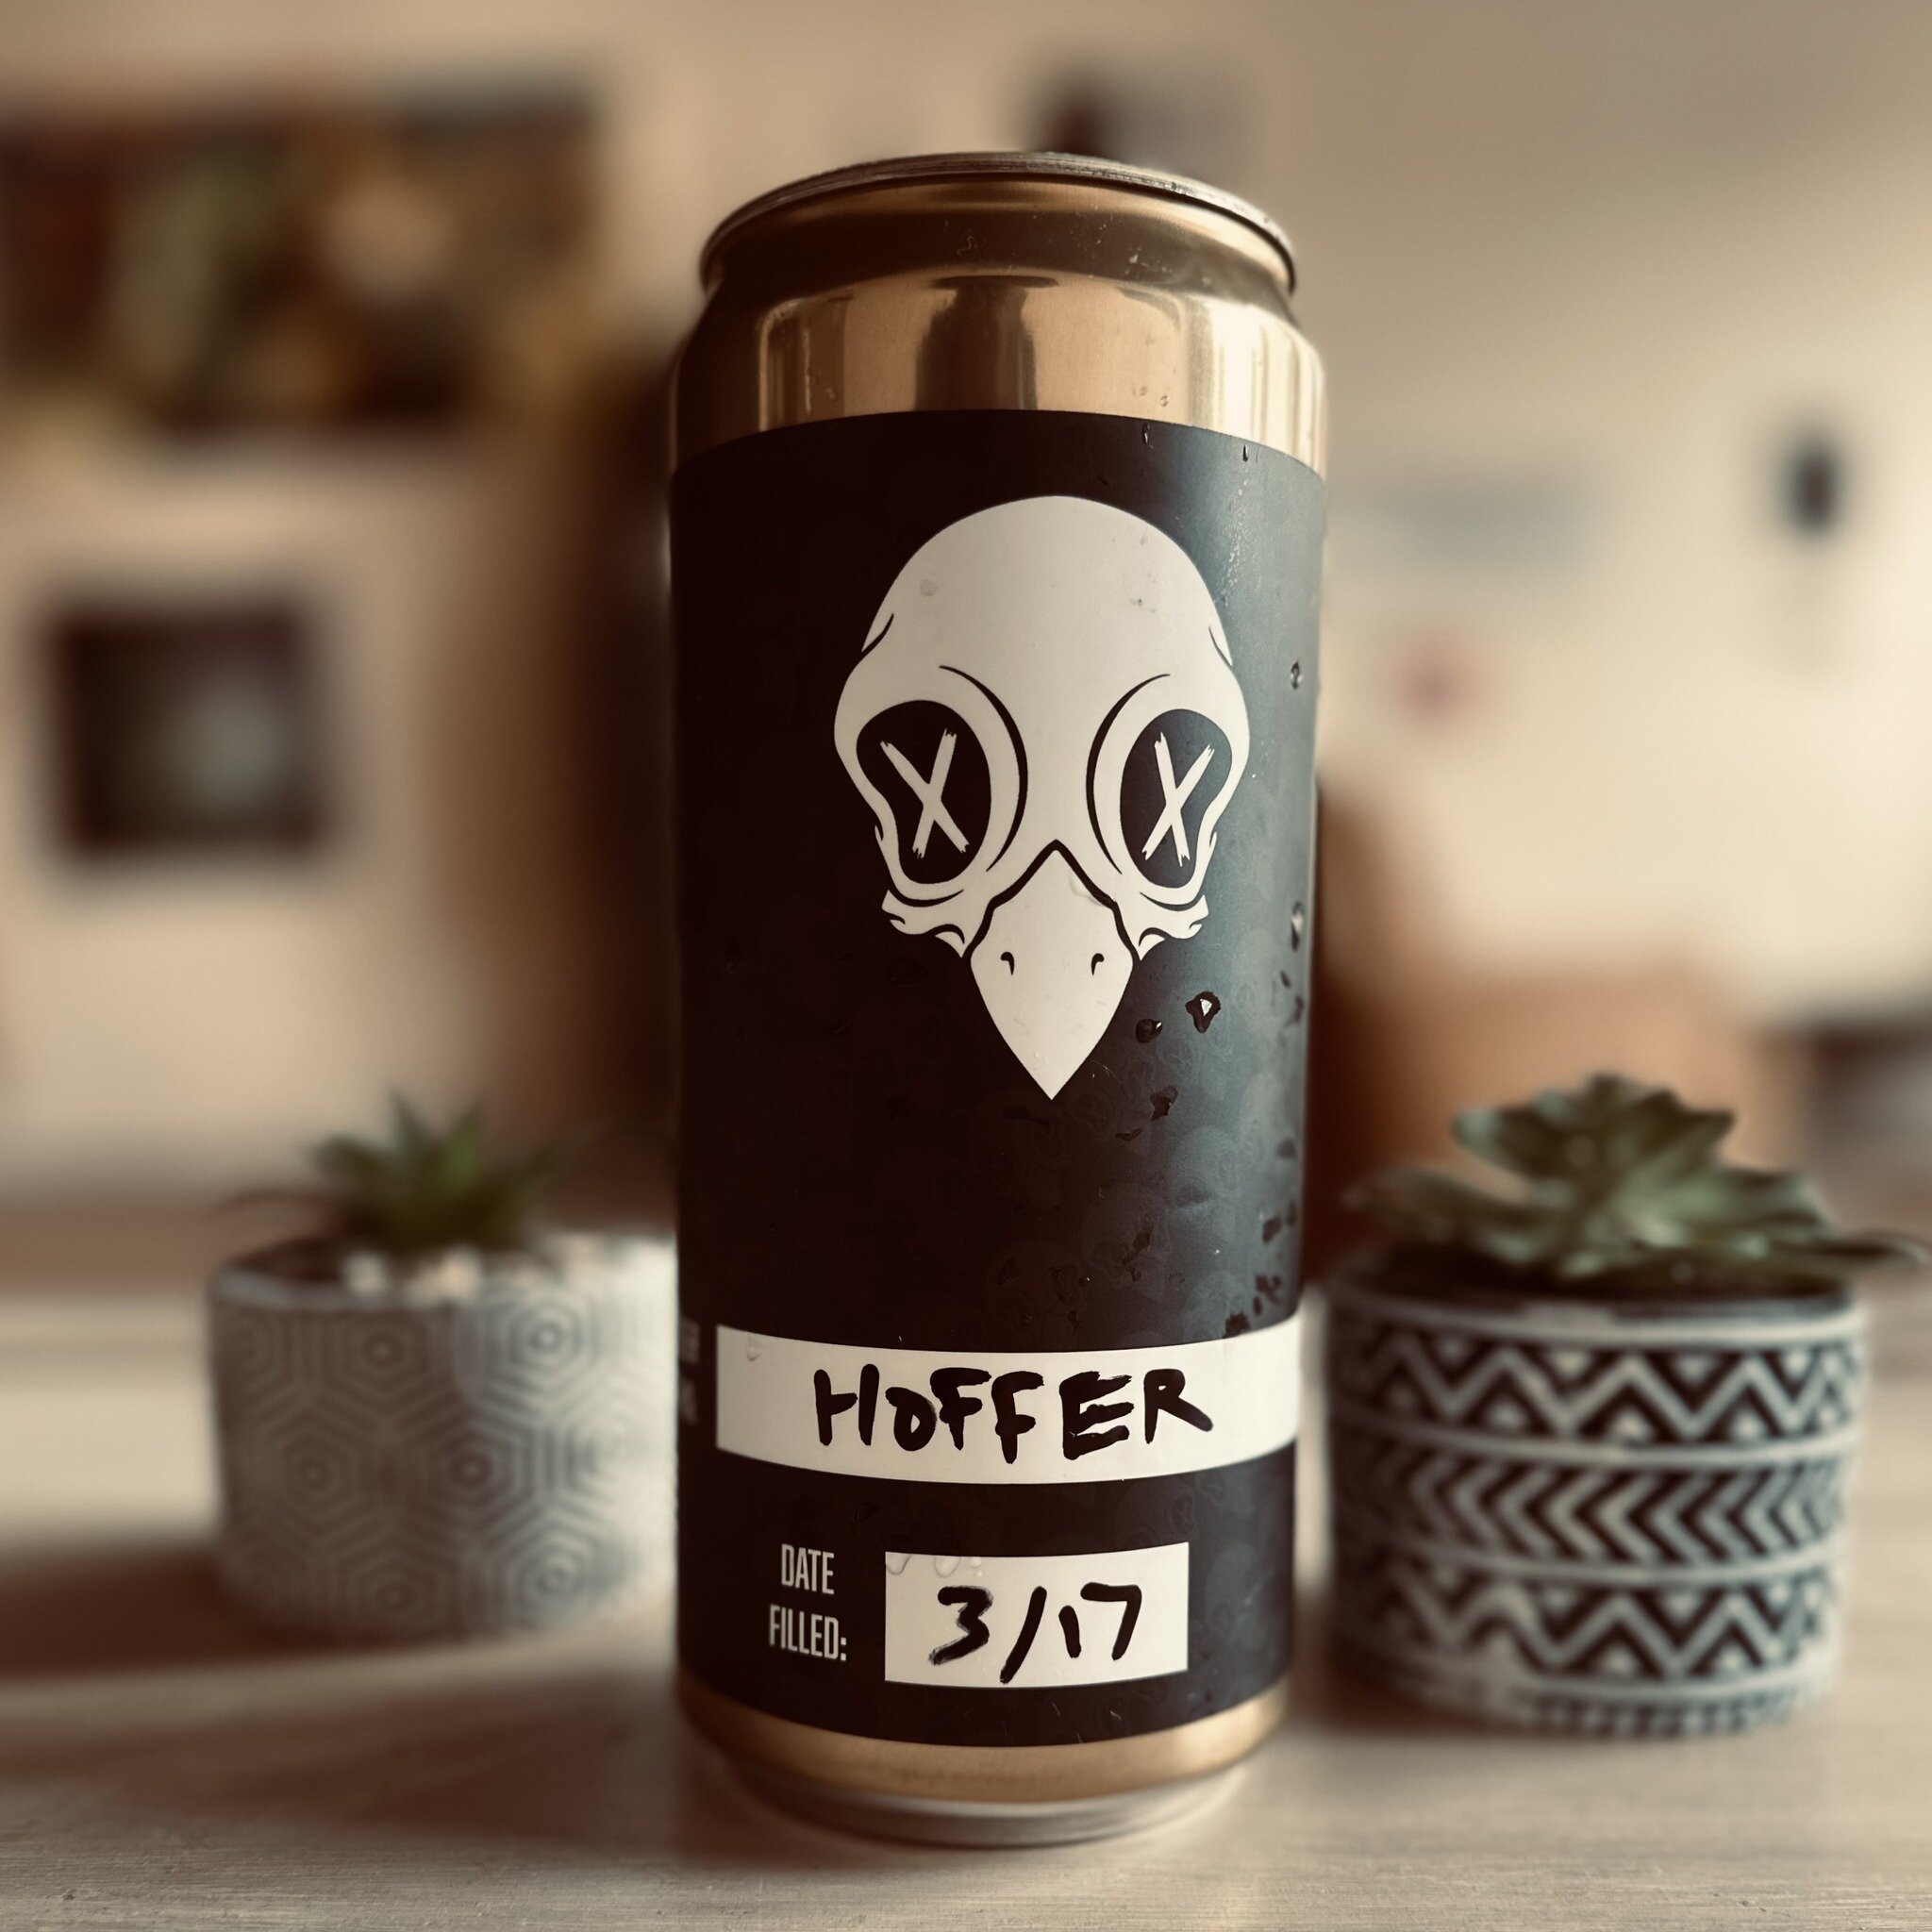 We still have 32oz Crowlers available of Hoffer, our House IPA! As we prepare for our next canning session, what would YOU like to see available to-go! Comment down below! #craftbeer #nanobrewery #centralpatastingtrail #welovephilipsburg #statecolleg